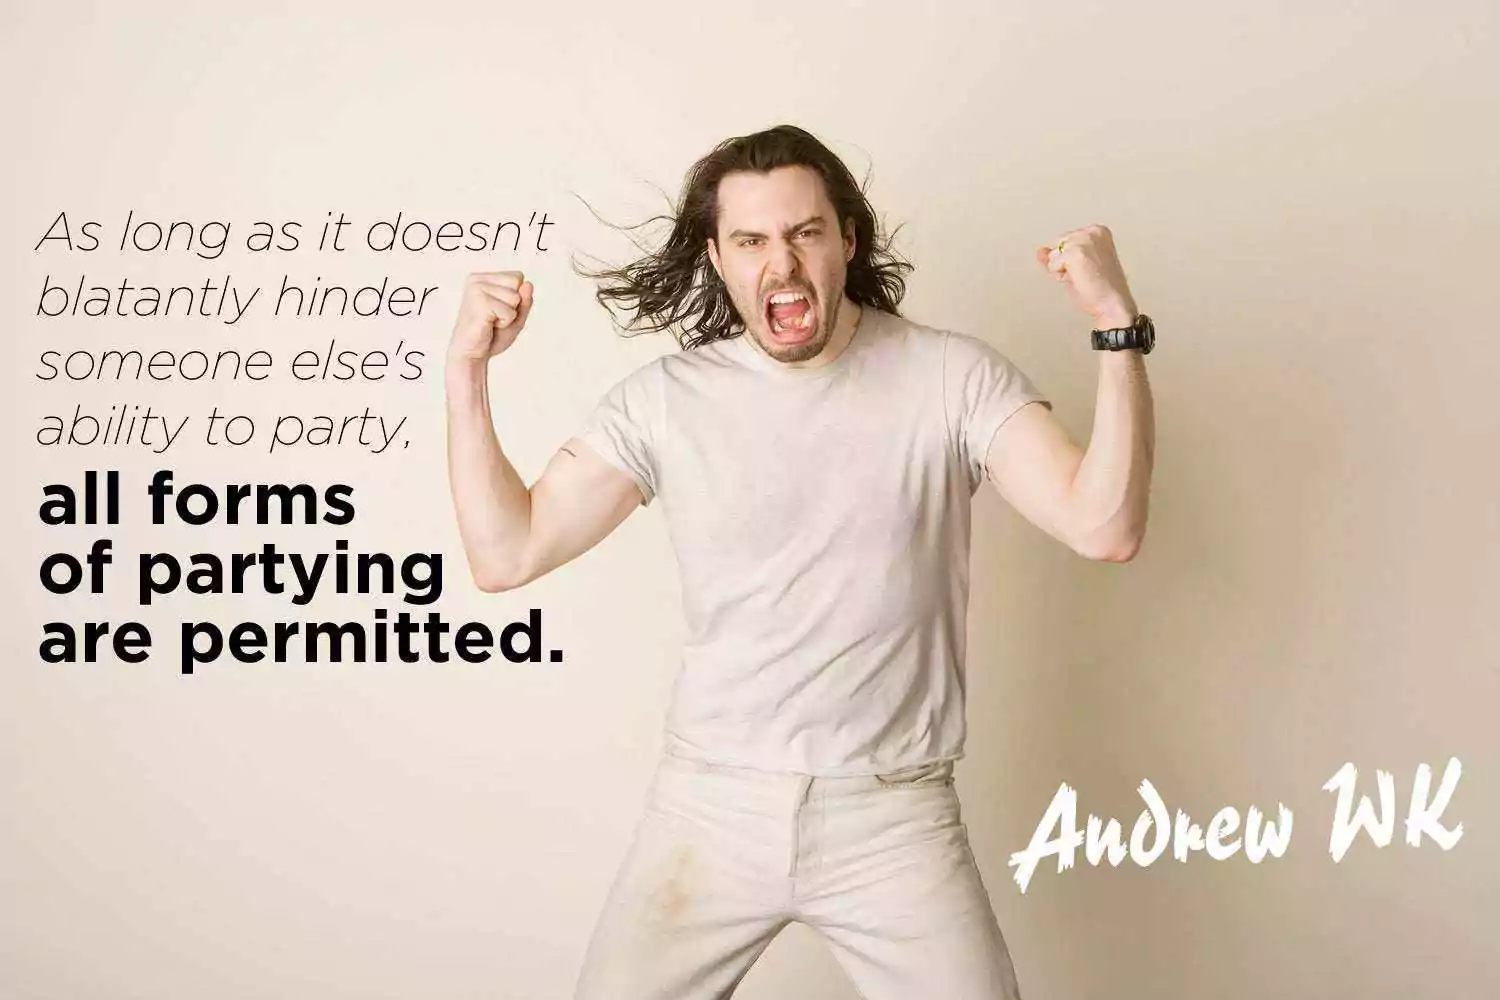 Andrew Wk Review